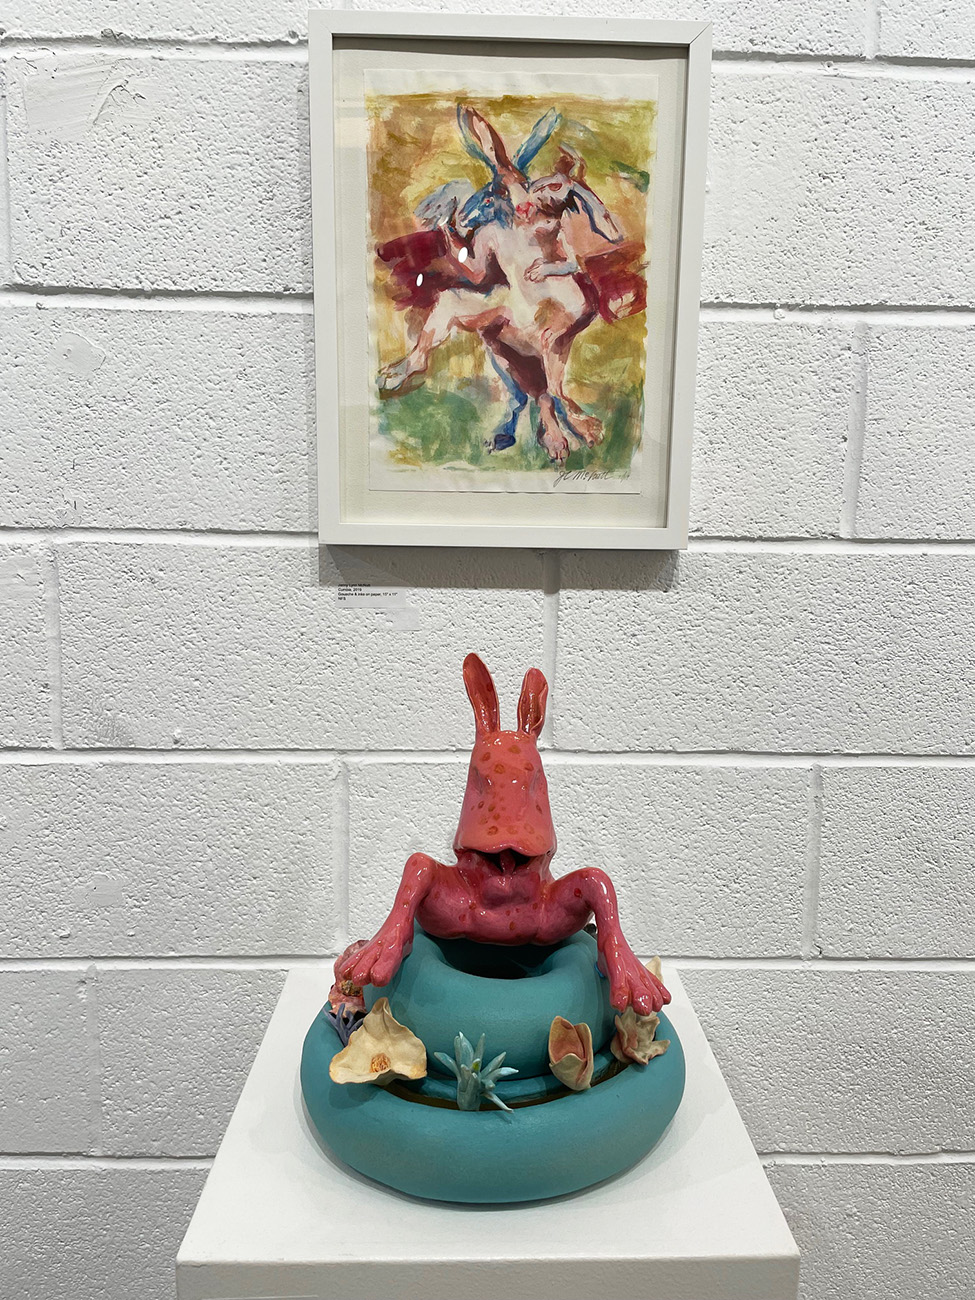 A red crab statue on a white surface next to a painting

Description automatically generated